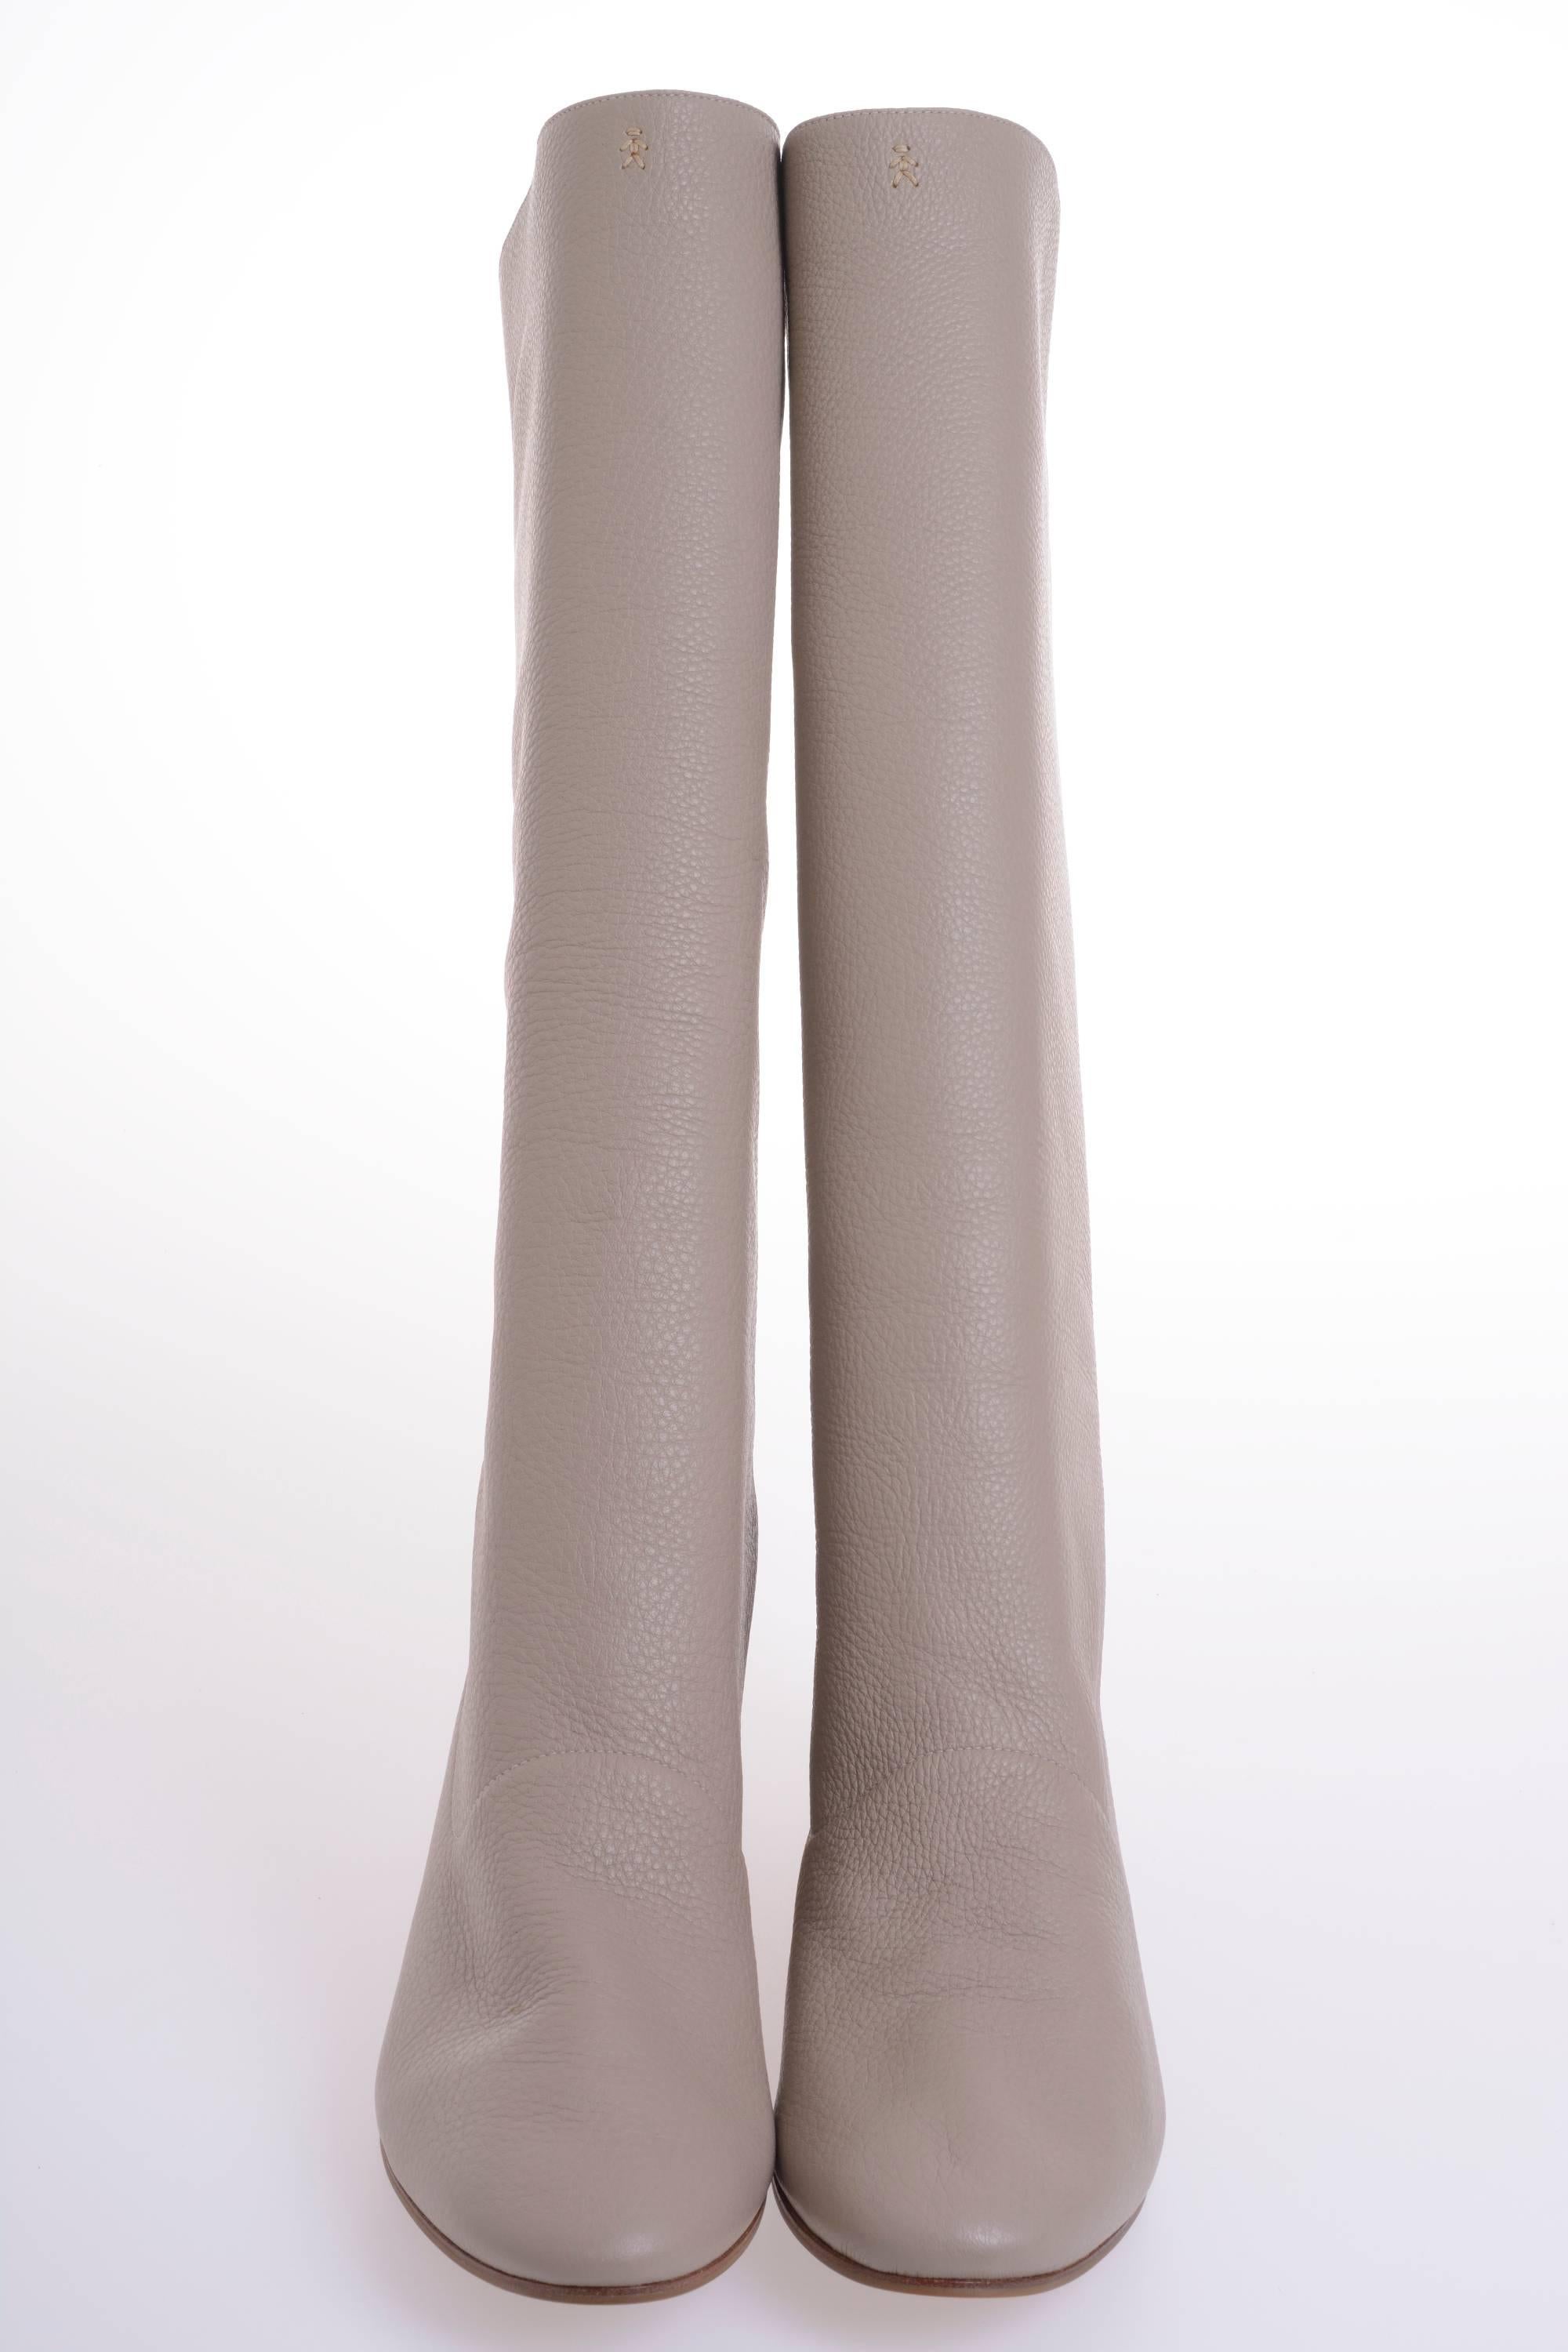 This Special Knee Slouch Boots by HENRY BEGUELIN are made with deer leather, has a beige color,   flat heel, wood outsole, almond toe shape, a logo embroidered on front and zipper back closure. Made in Italy.

Label:  HENRY BEGUELIN Vero cuoio, Made